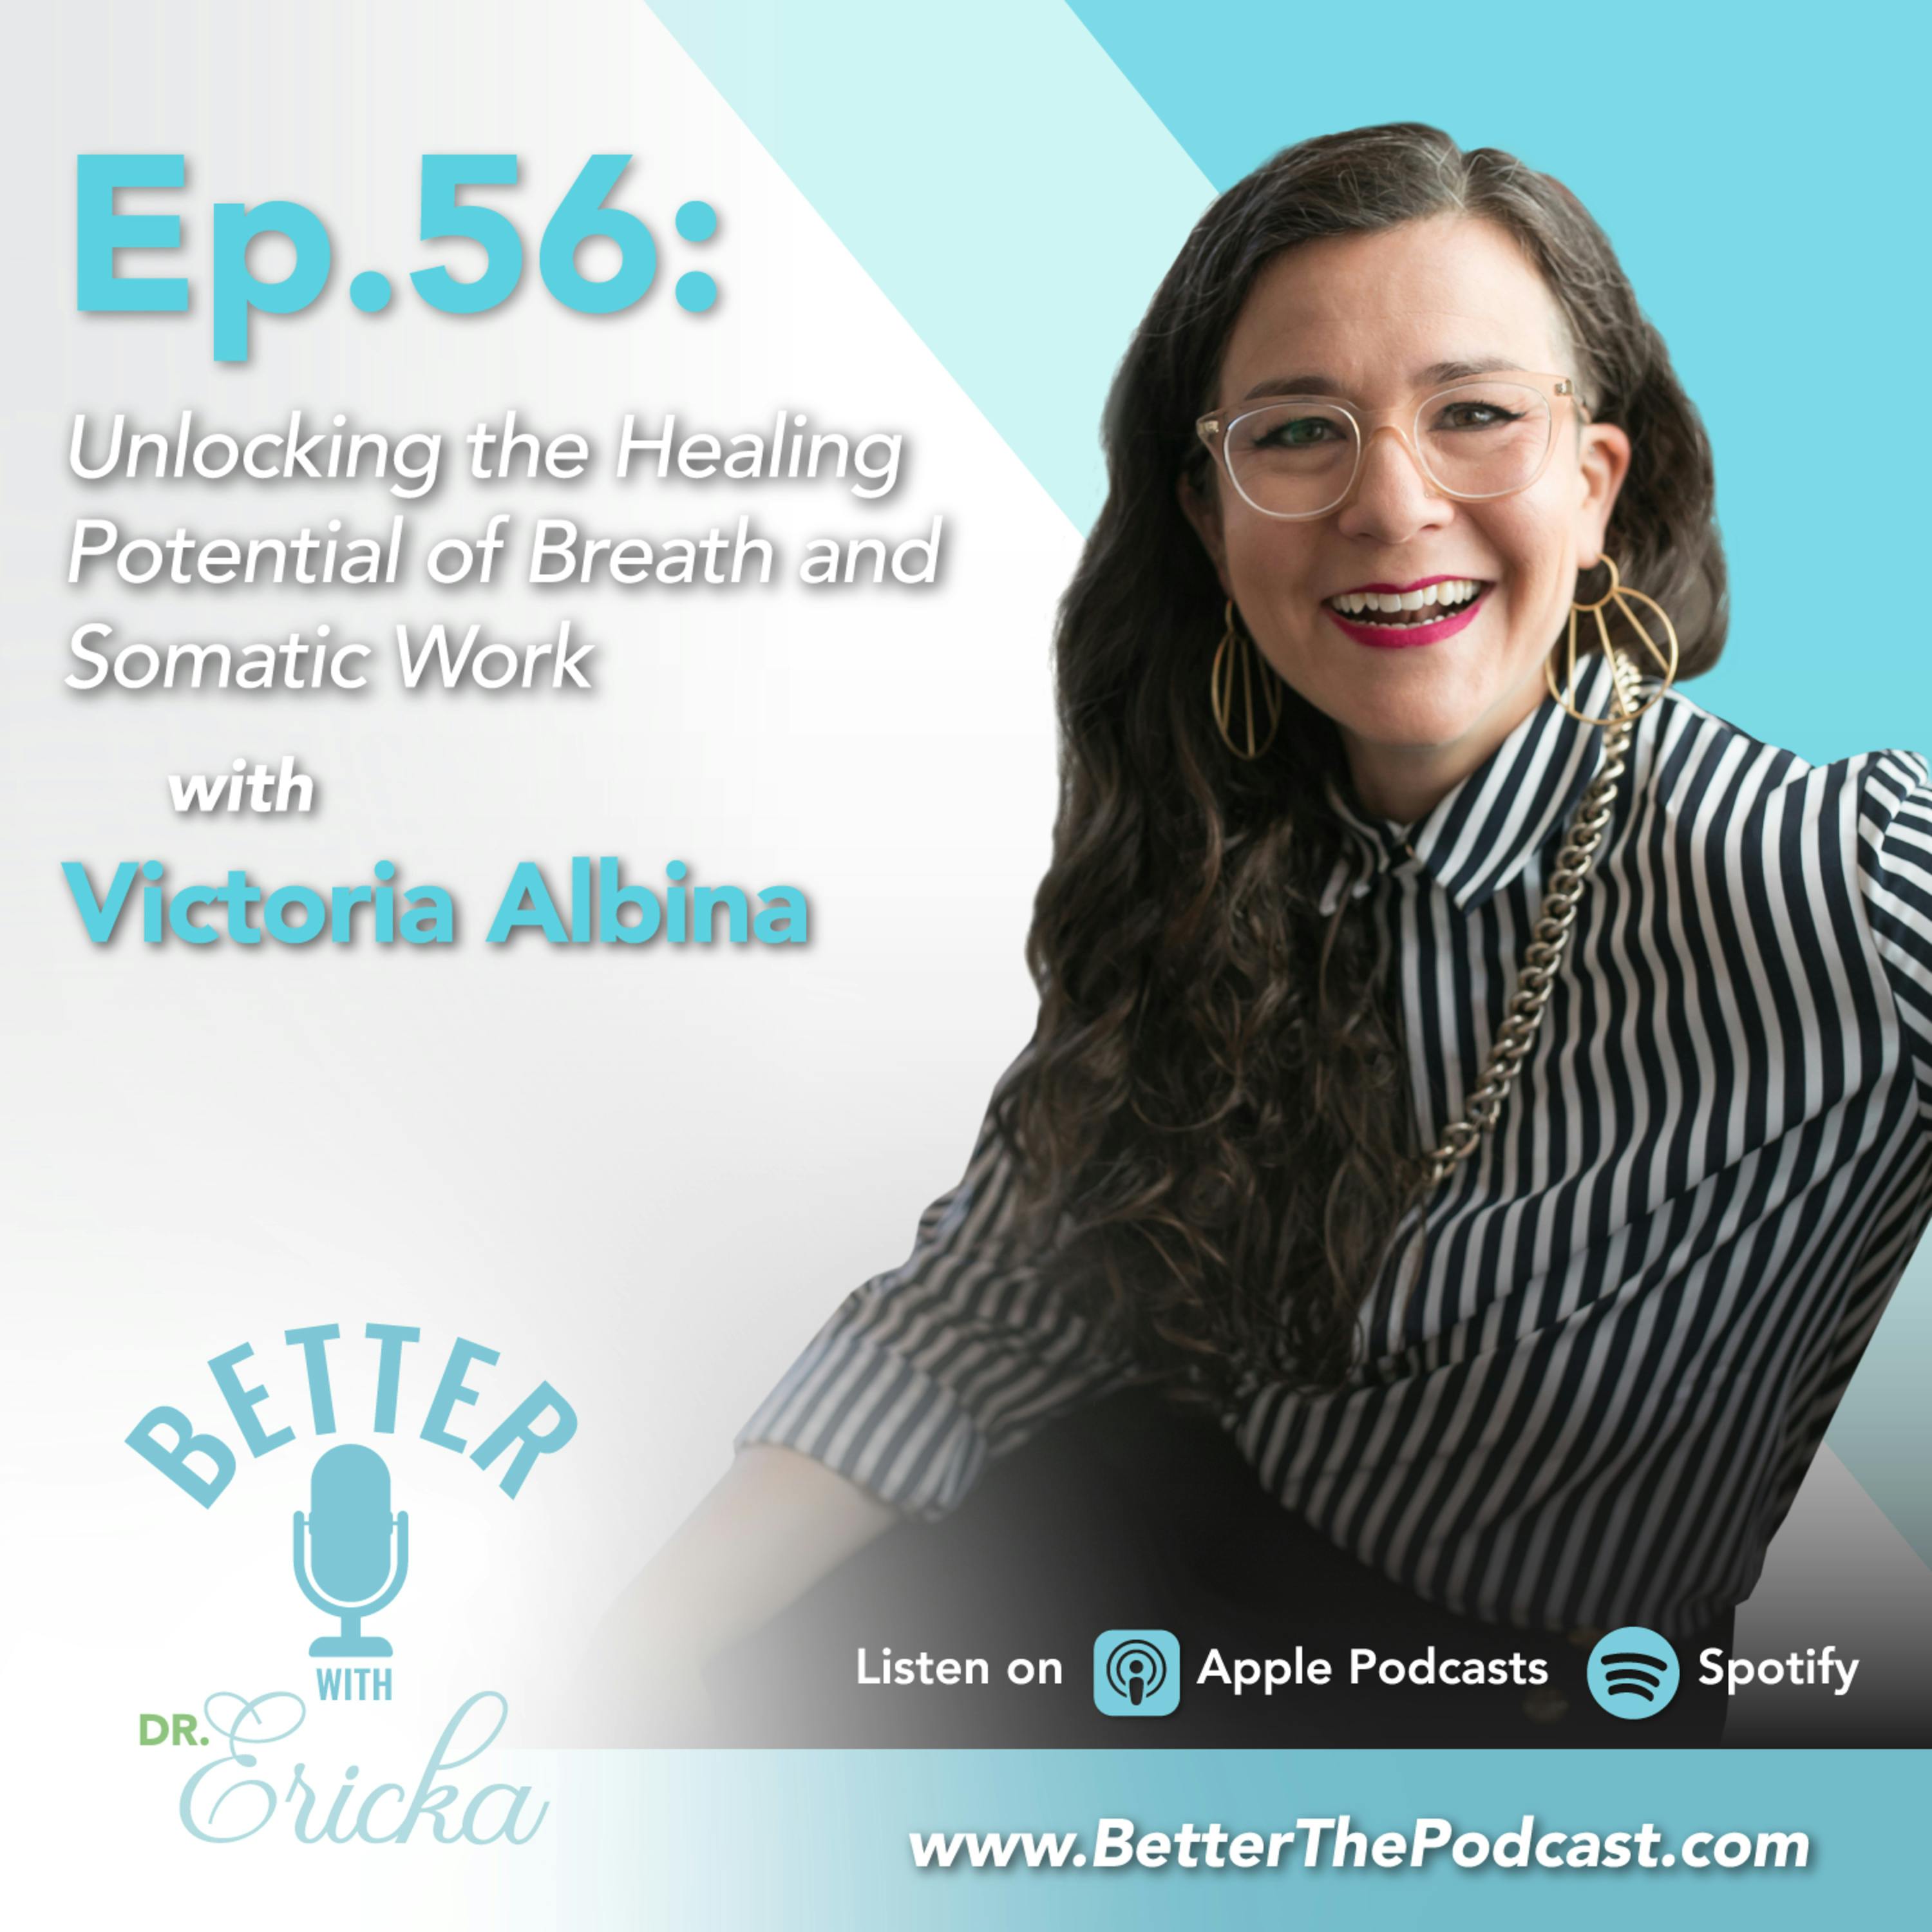 Unlocking the Healing Potential of Breath and Somatic Work with Victoria Albina